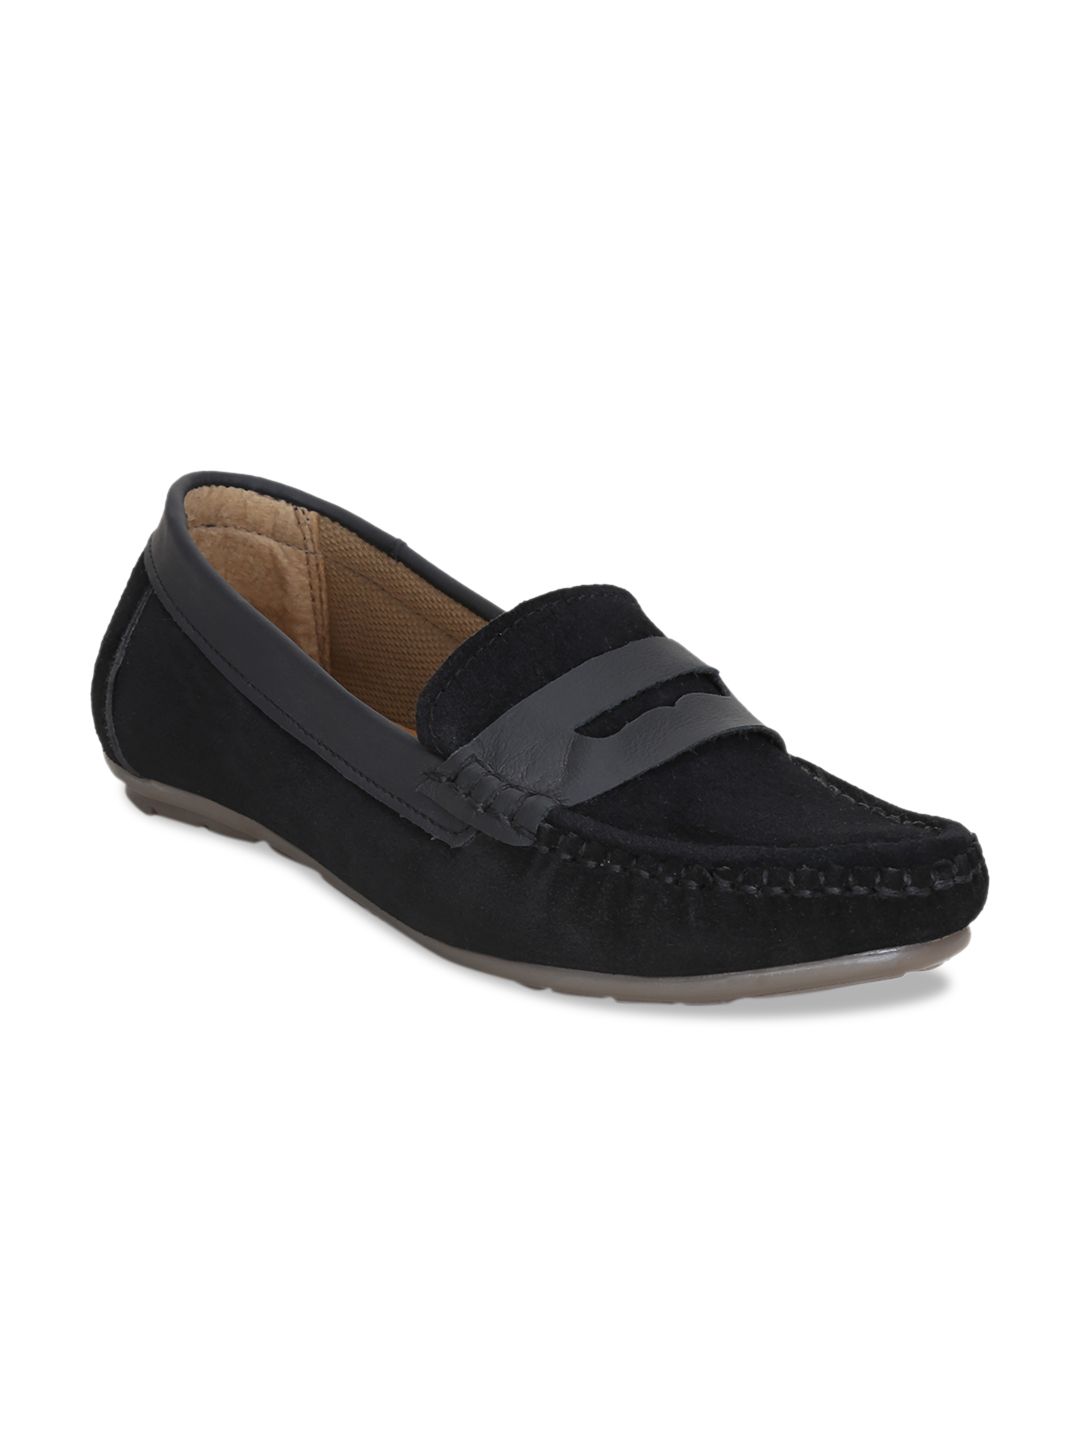 Get Glamr Women Black Suede Loafers Price in India